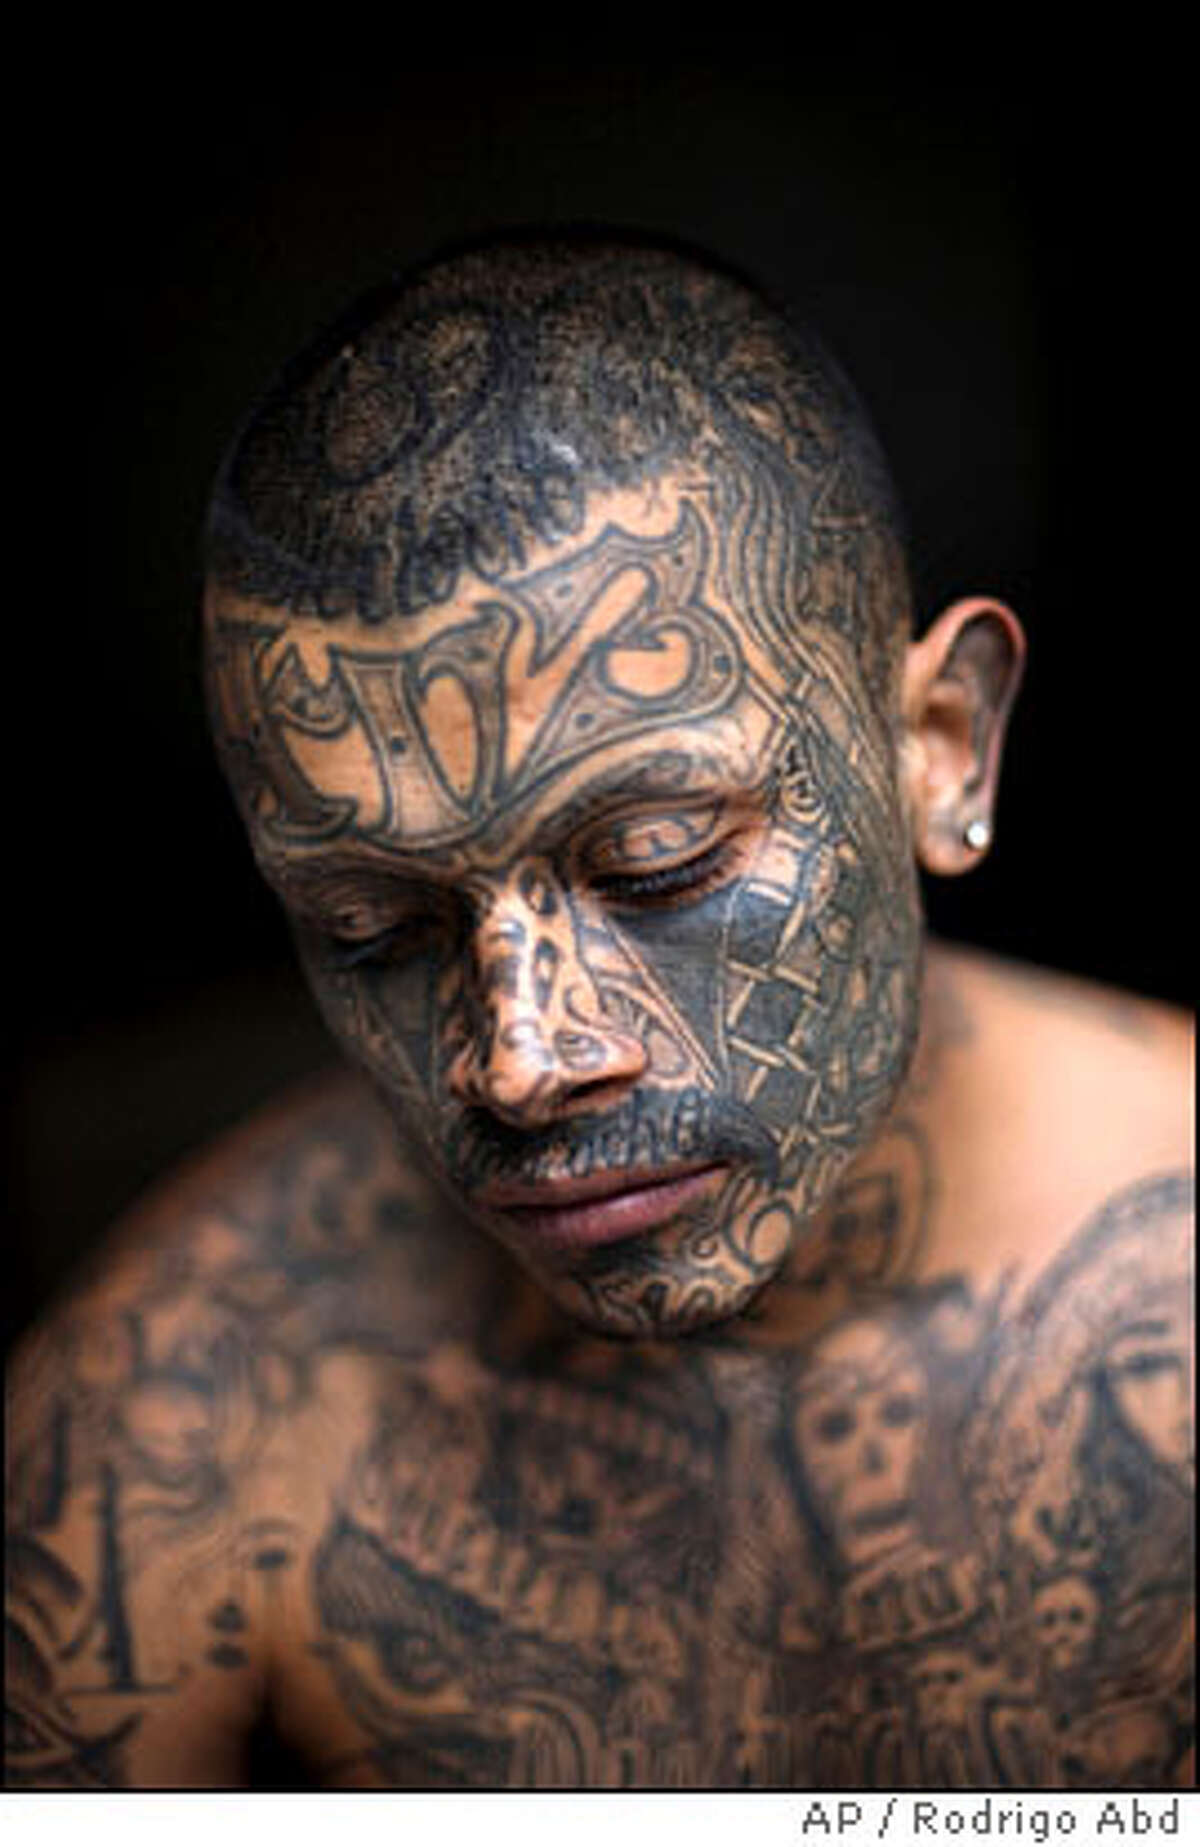 South African ex-gang members show their tattoos | Daily Mail Online